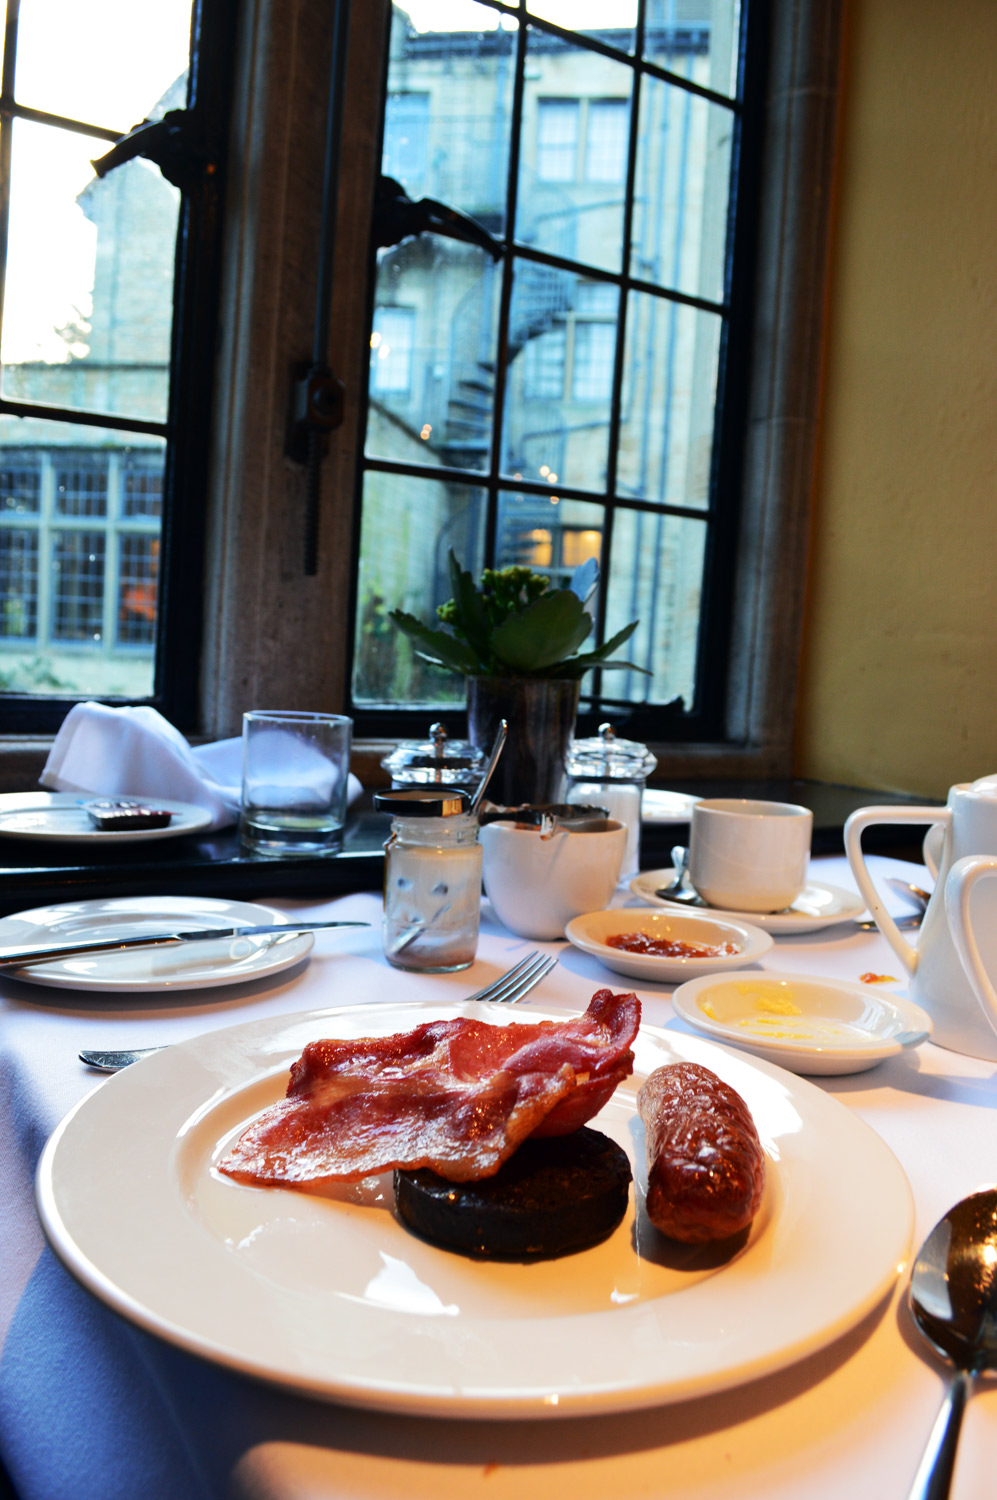 English breakfast at the Hare and Hounds Hotel